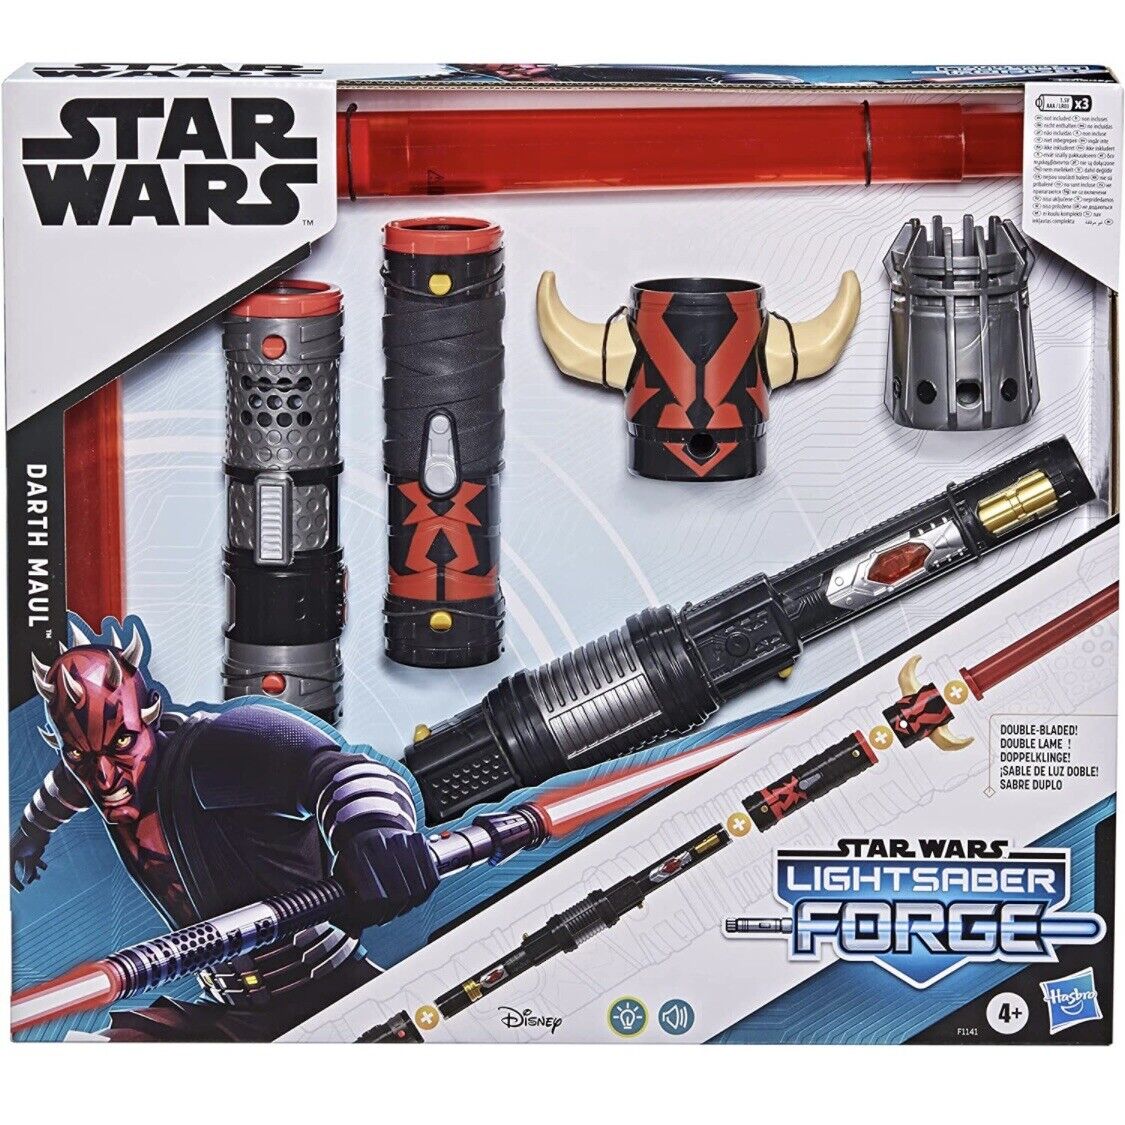 STAR WARS DARTH MAUL DOUBLE BLADE RED LIGHTSABER  FORGE, Age 4 Years And Up.